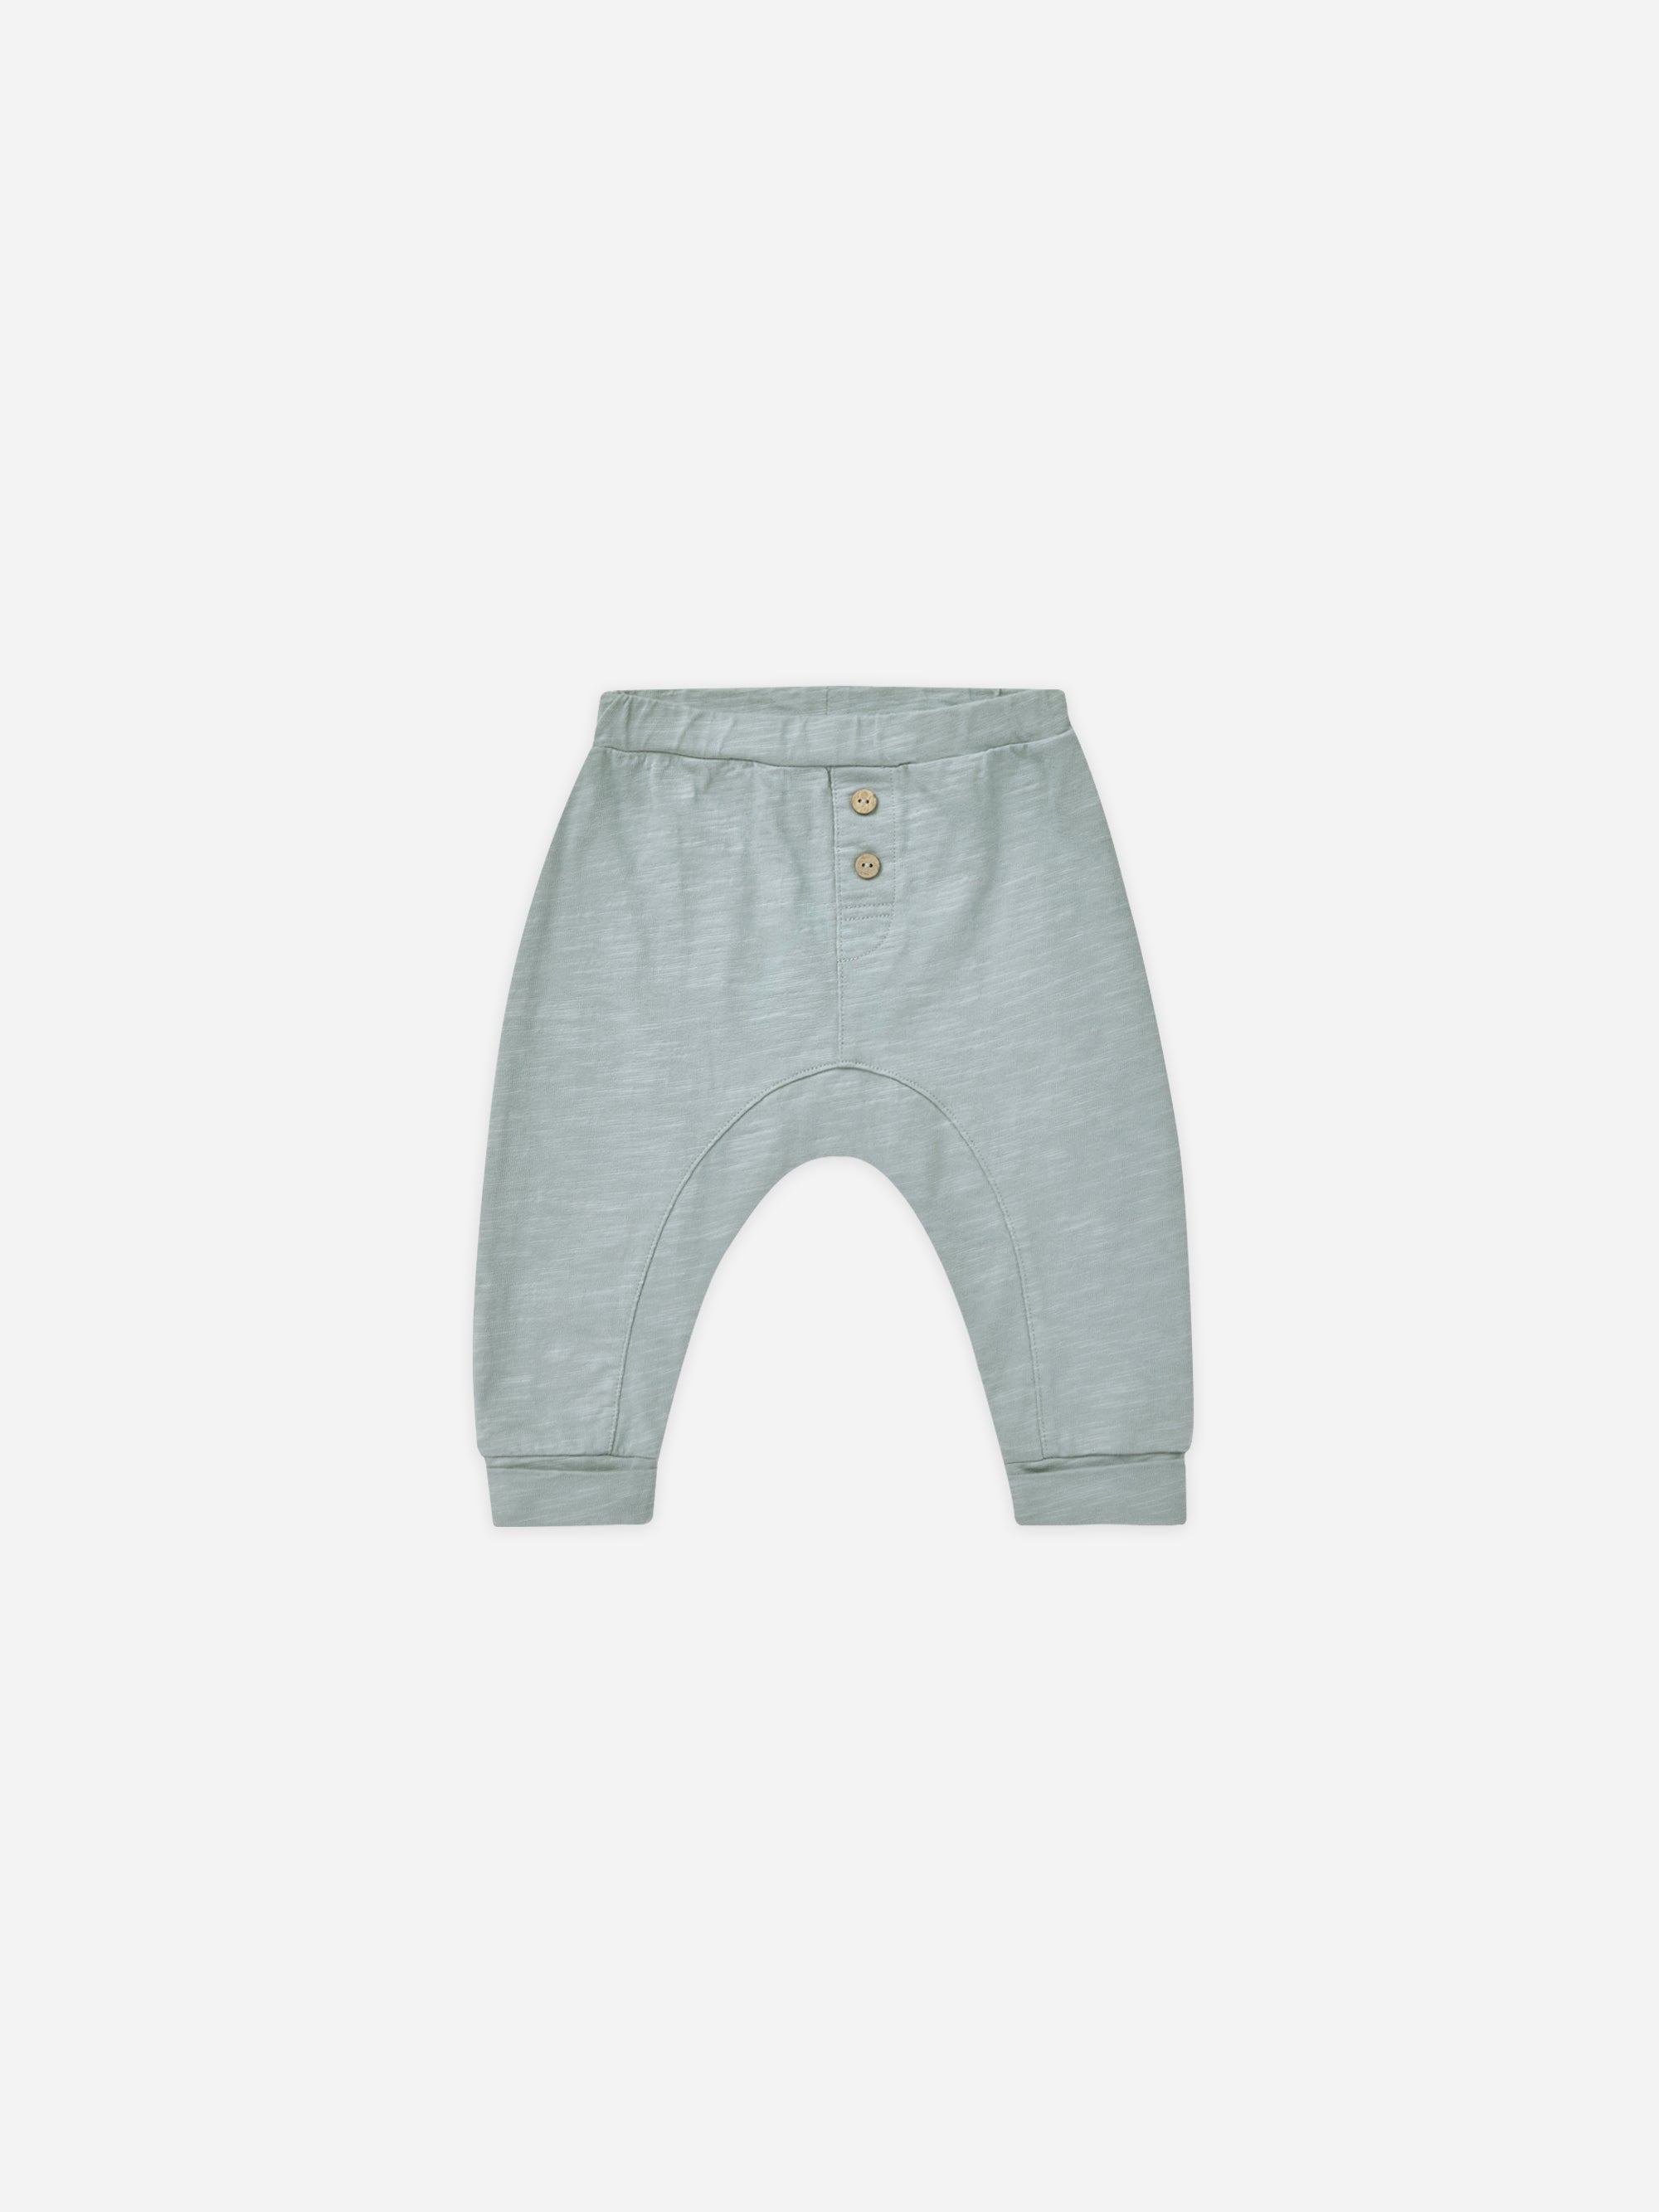 Baby Cru Pant || Blue - Rylee + Cru | Kids Clothes | Trendy Baby Clothes | Modern Infant Outfits |